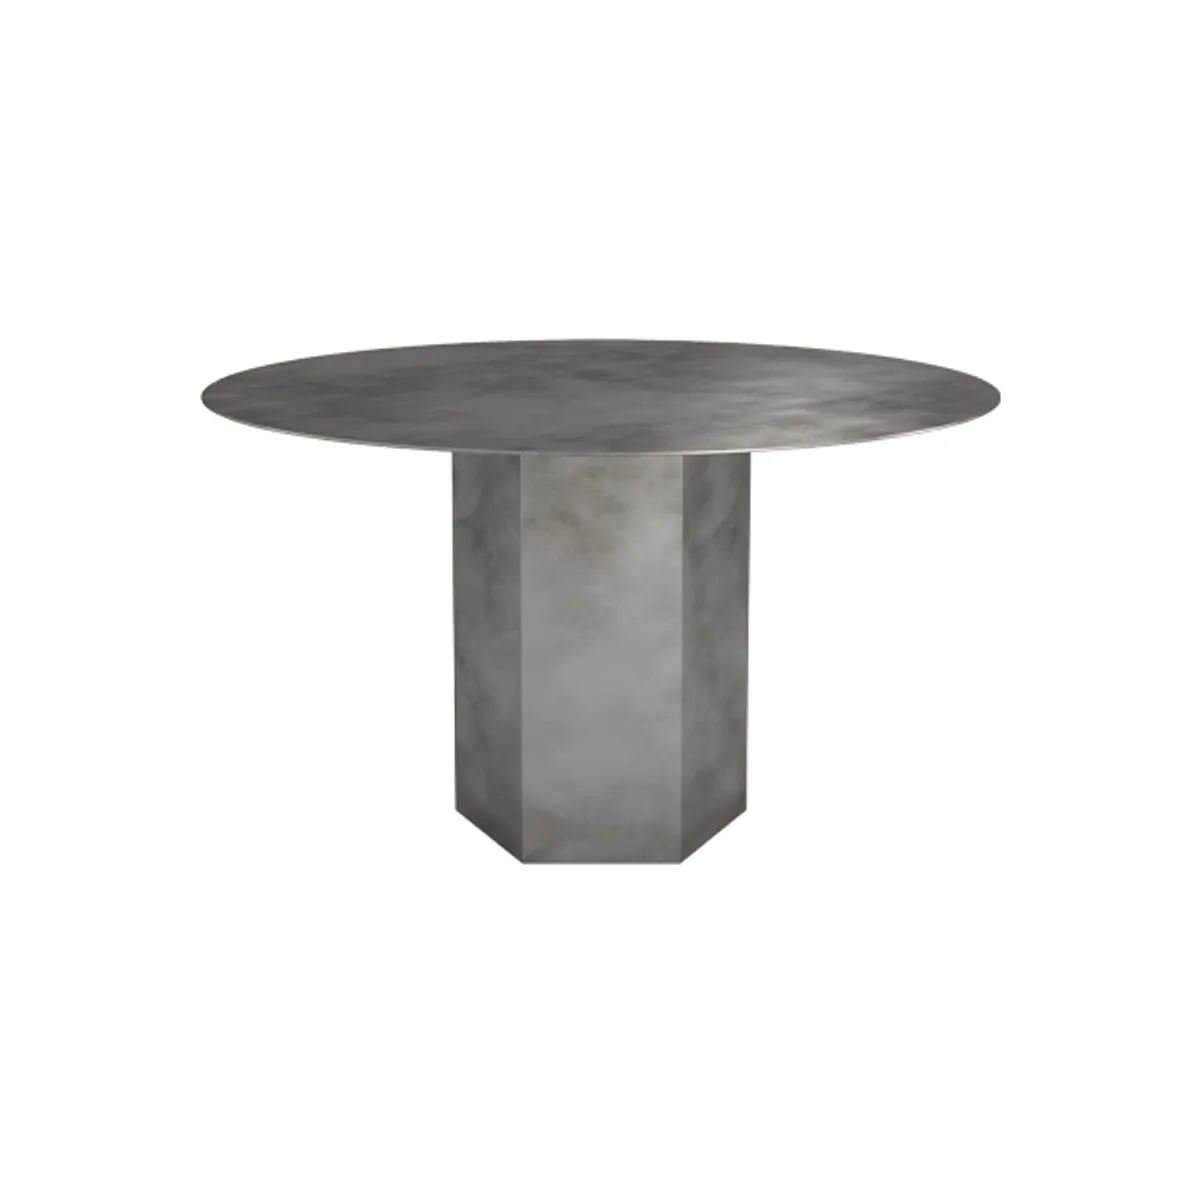 Epic metal coffee table Inside Out Contracts5